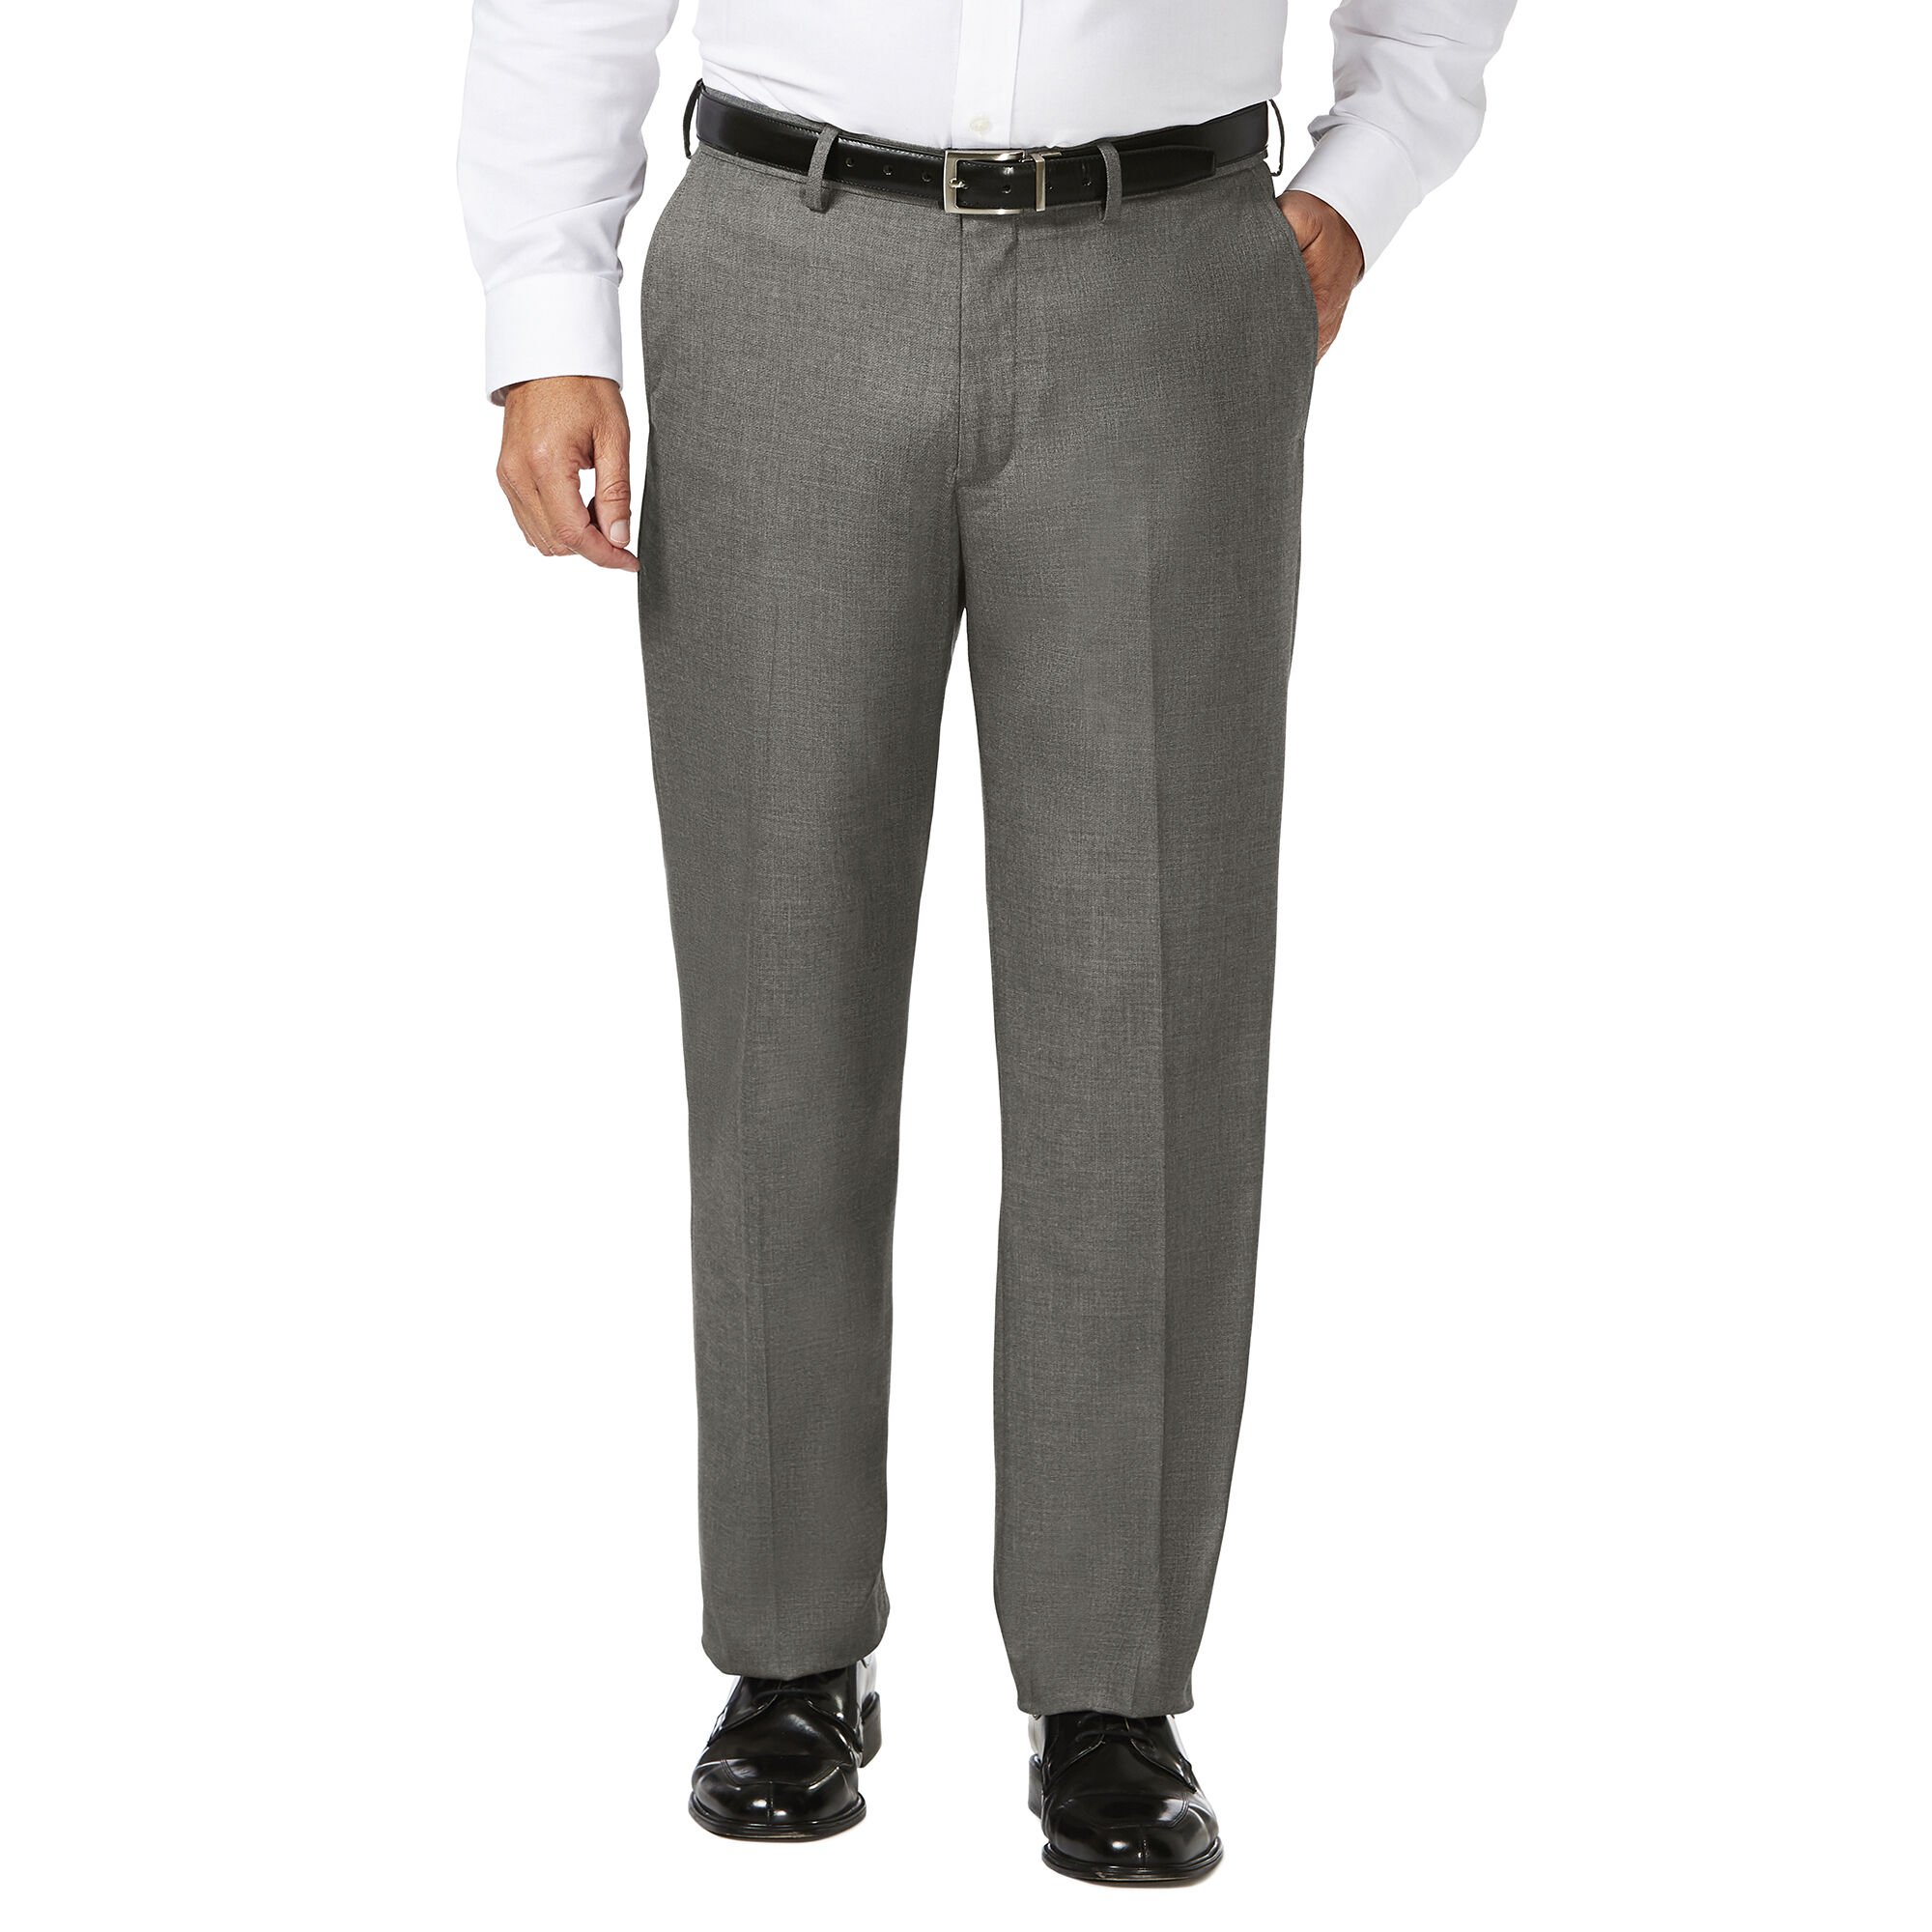 Big & Tall J.M. Haggar Dress Pant - Sharkskin Medium Grey Big & Tall Classic Fit Flat Front Hidden Expandable Waistband Hook and bar Closure 64% Polyester. 34% Viscoe Rayon 2% Spandex Dry Clean Only Imported Style #: HD90885 Size - NoSz